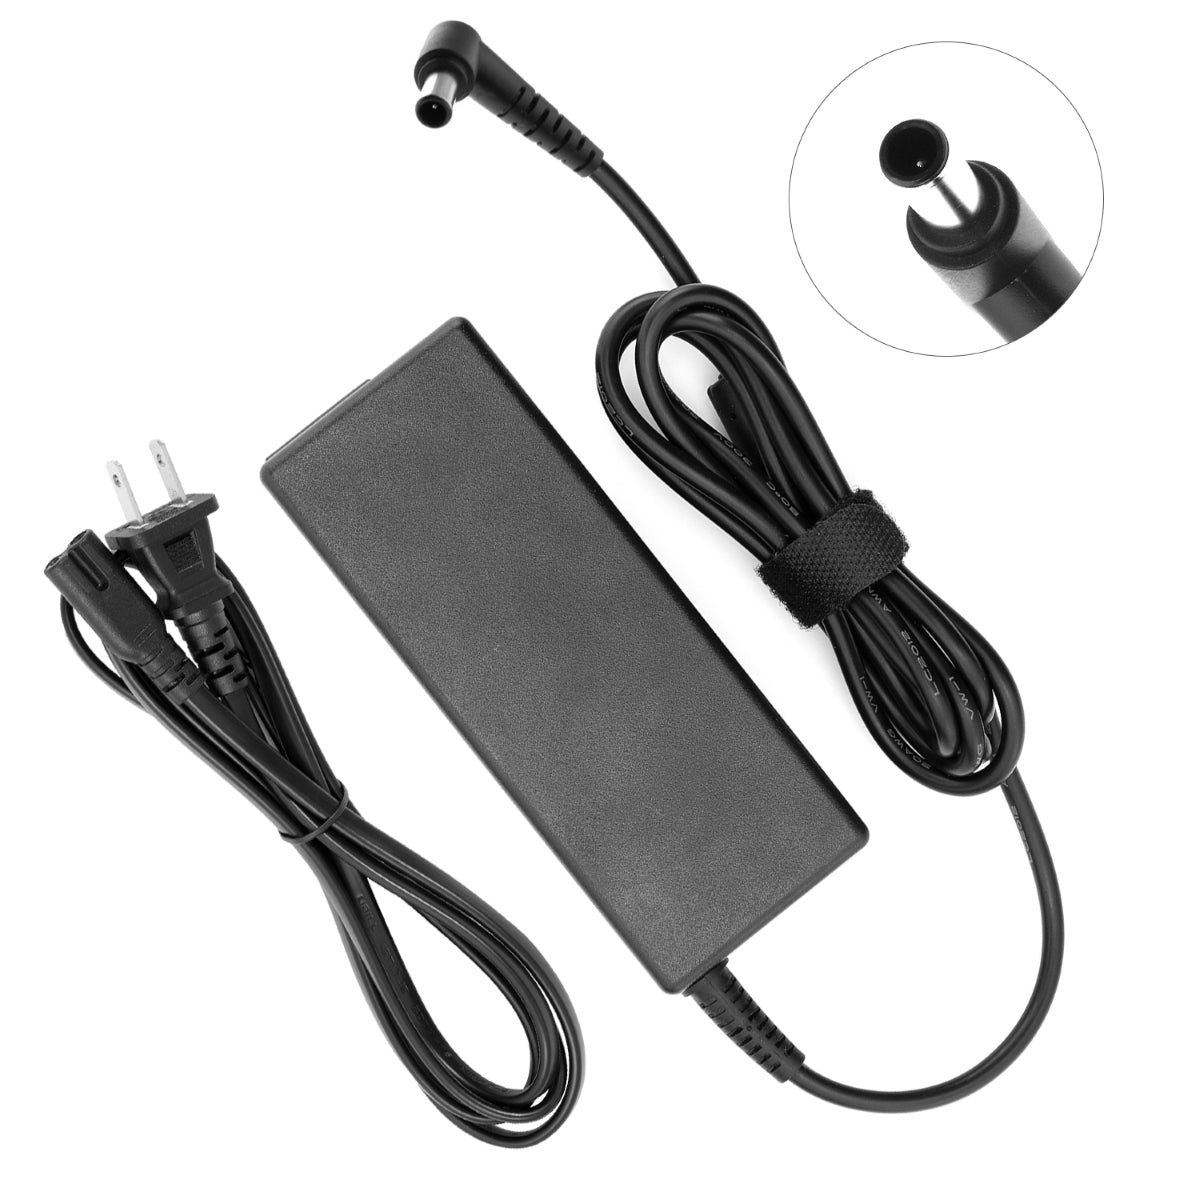 AC Adapter Power Supply for Samsung LS27E390HS Monitor